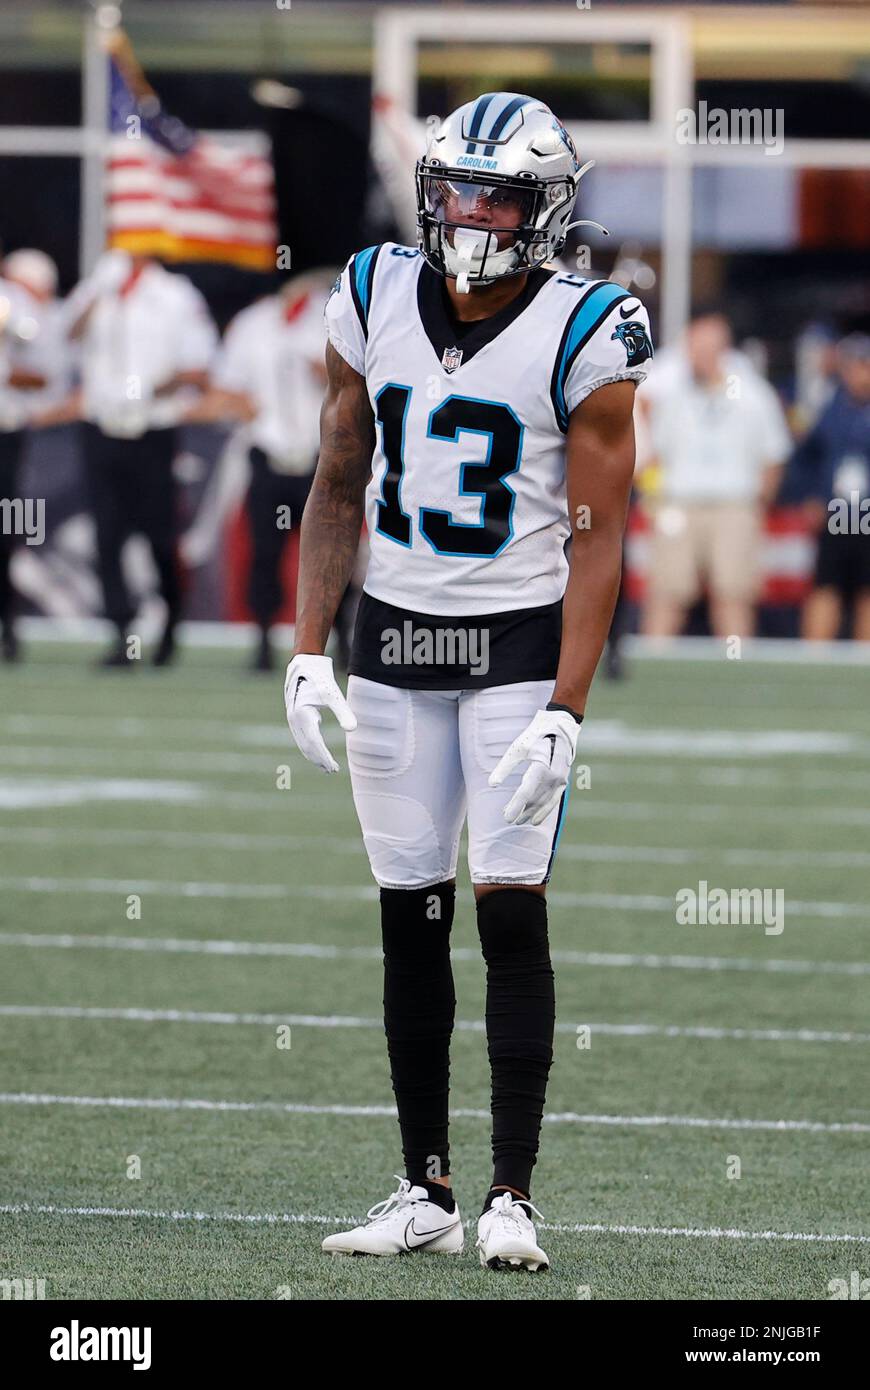 FOXBOROUGH, MA - AUGUST 19: Carolina Panthers wide receiver Ra'Shaun Henry  (13) during an NFL preseason game between the New England Patriots and the Carolina  Panthers on August 19, 2022, at Gillette